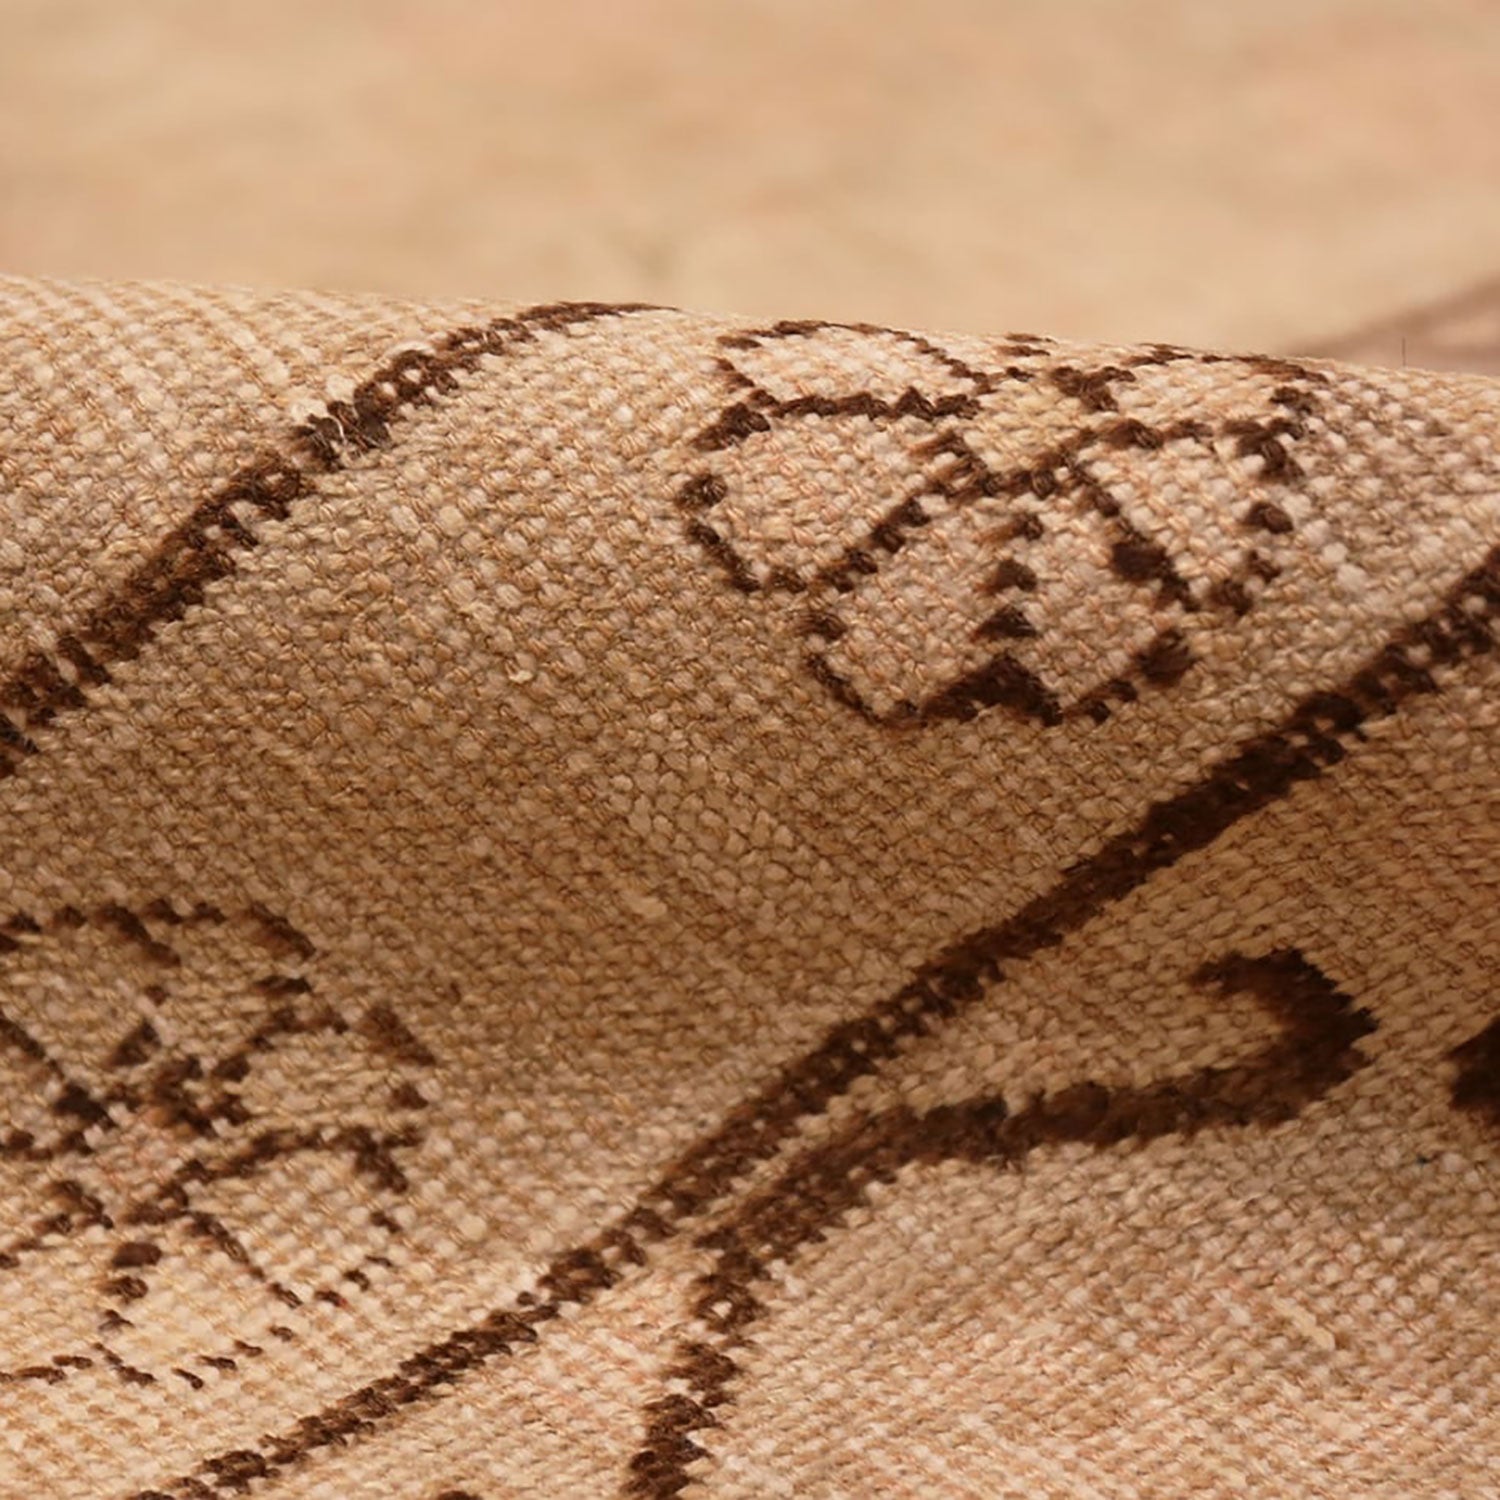 Close-up of a beige fabric with textured weave and brown patterns.